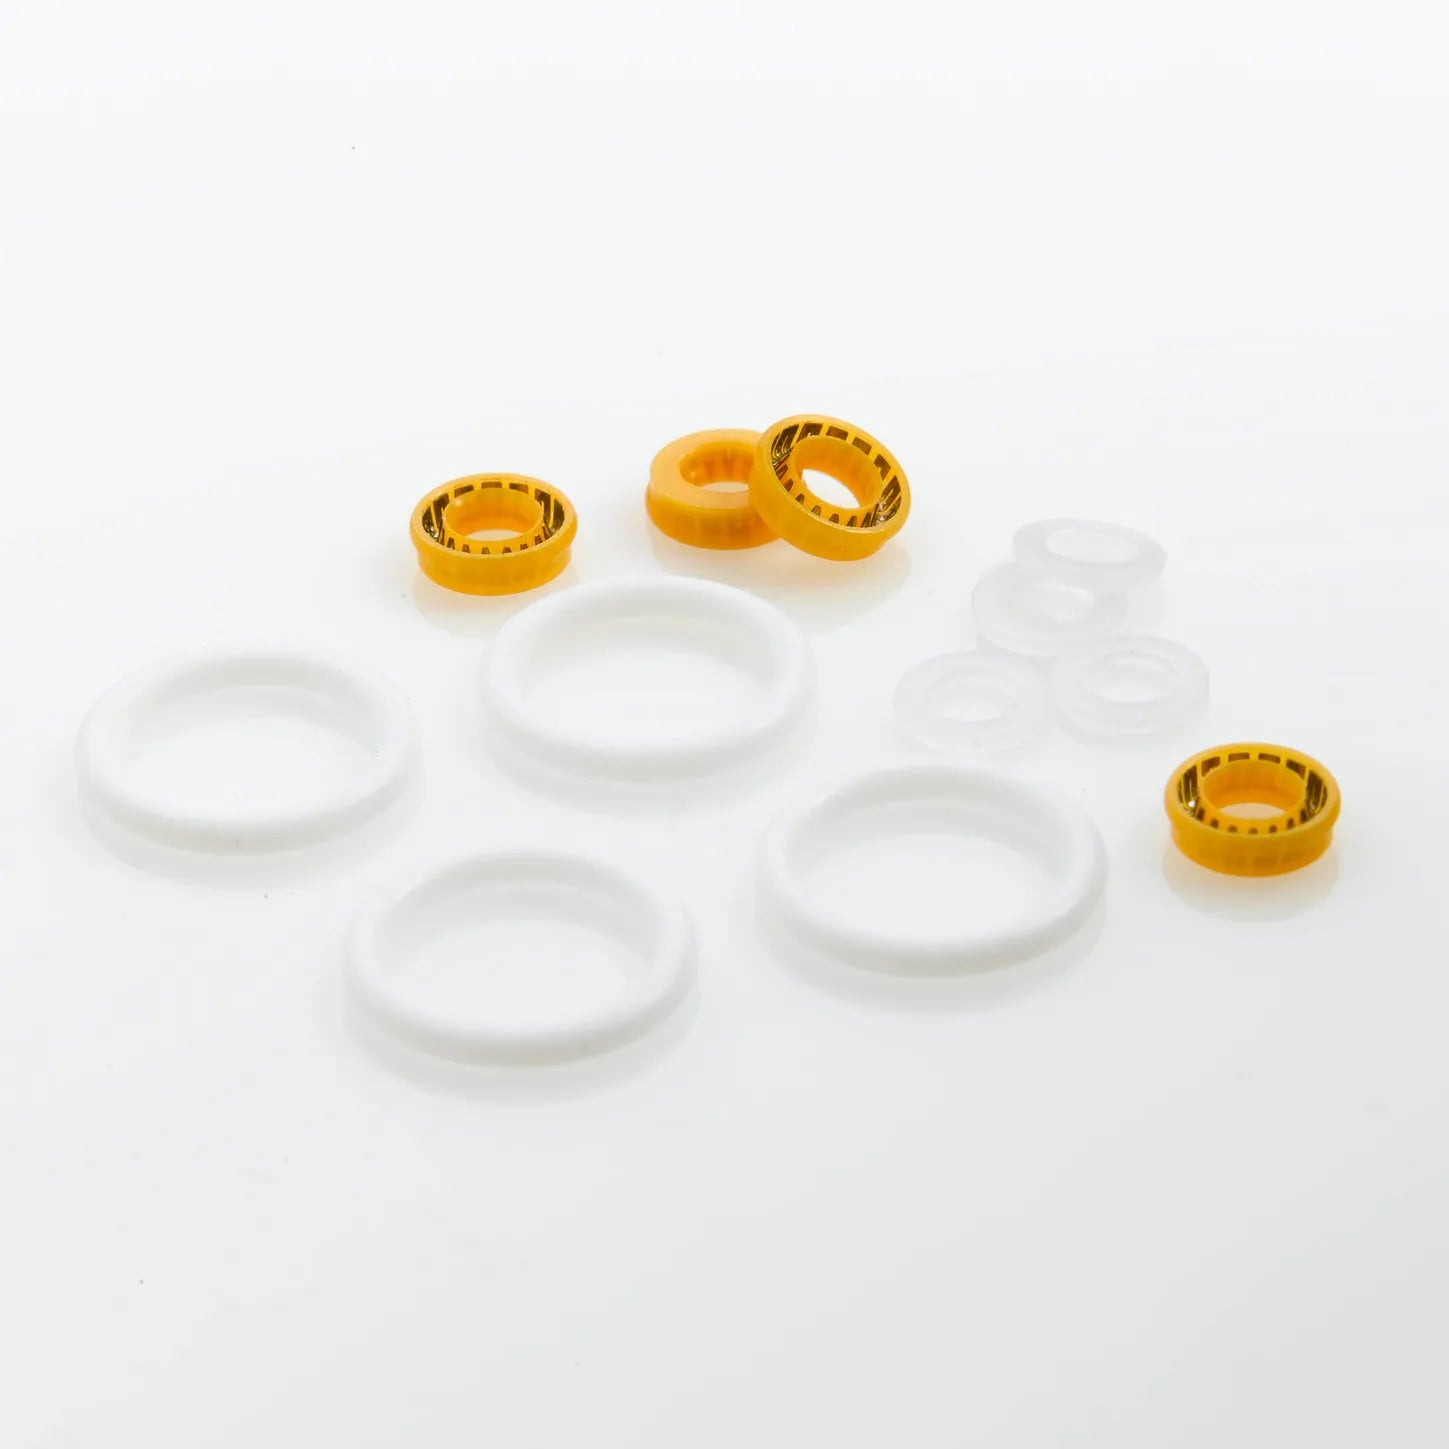 High Pressure Seal Kit, Comparable to Perkin Elmer # 02540275, 0254-0275